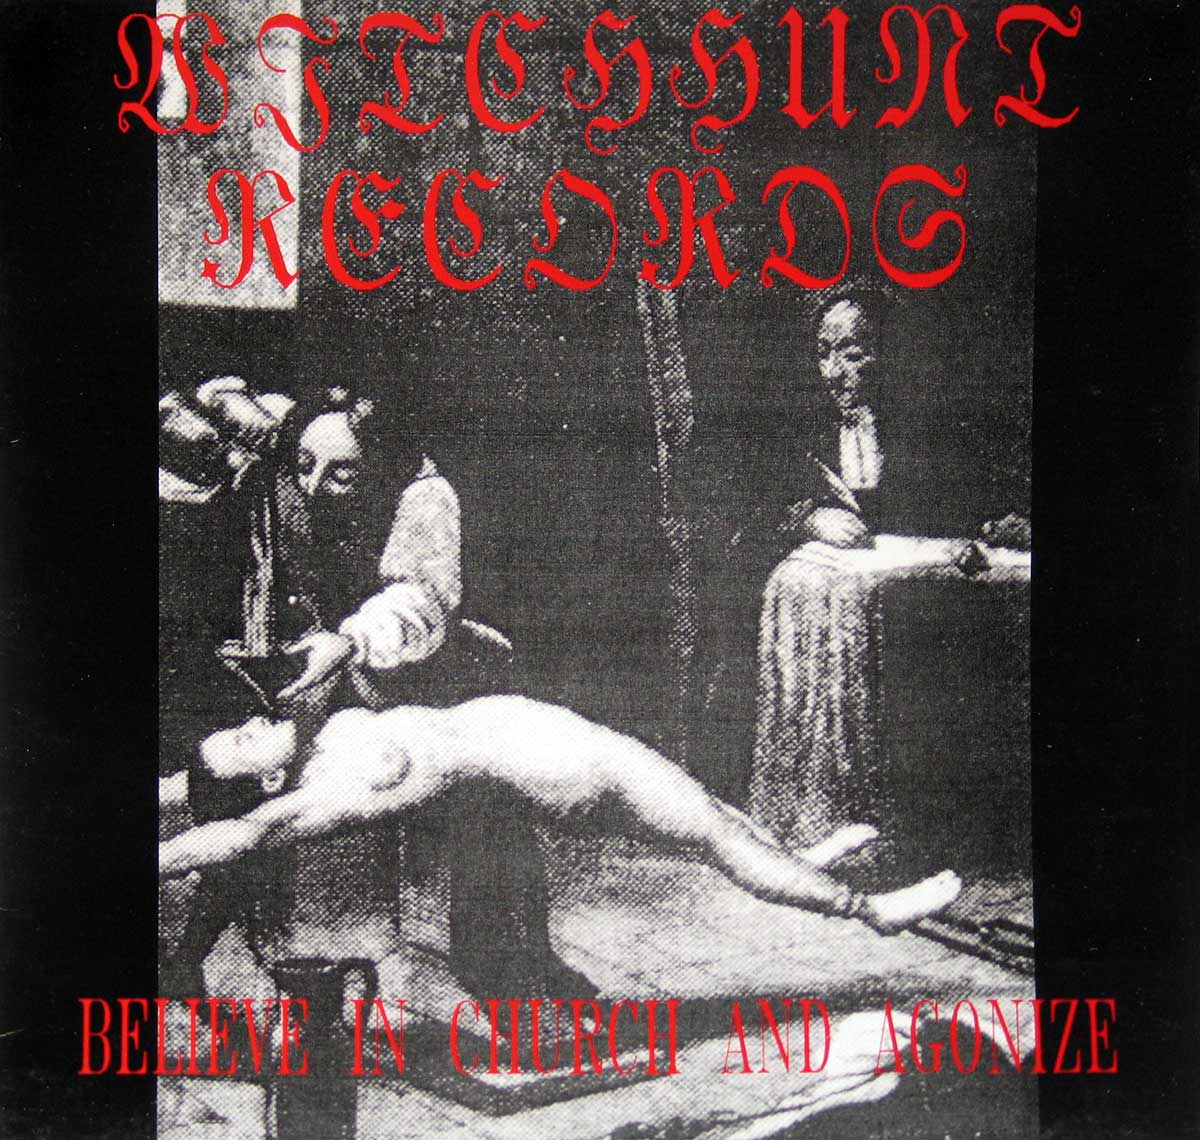 Album Front cover photo of : Witchhunt Records Believe in Church and Agonize